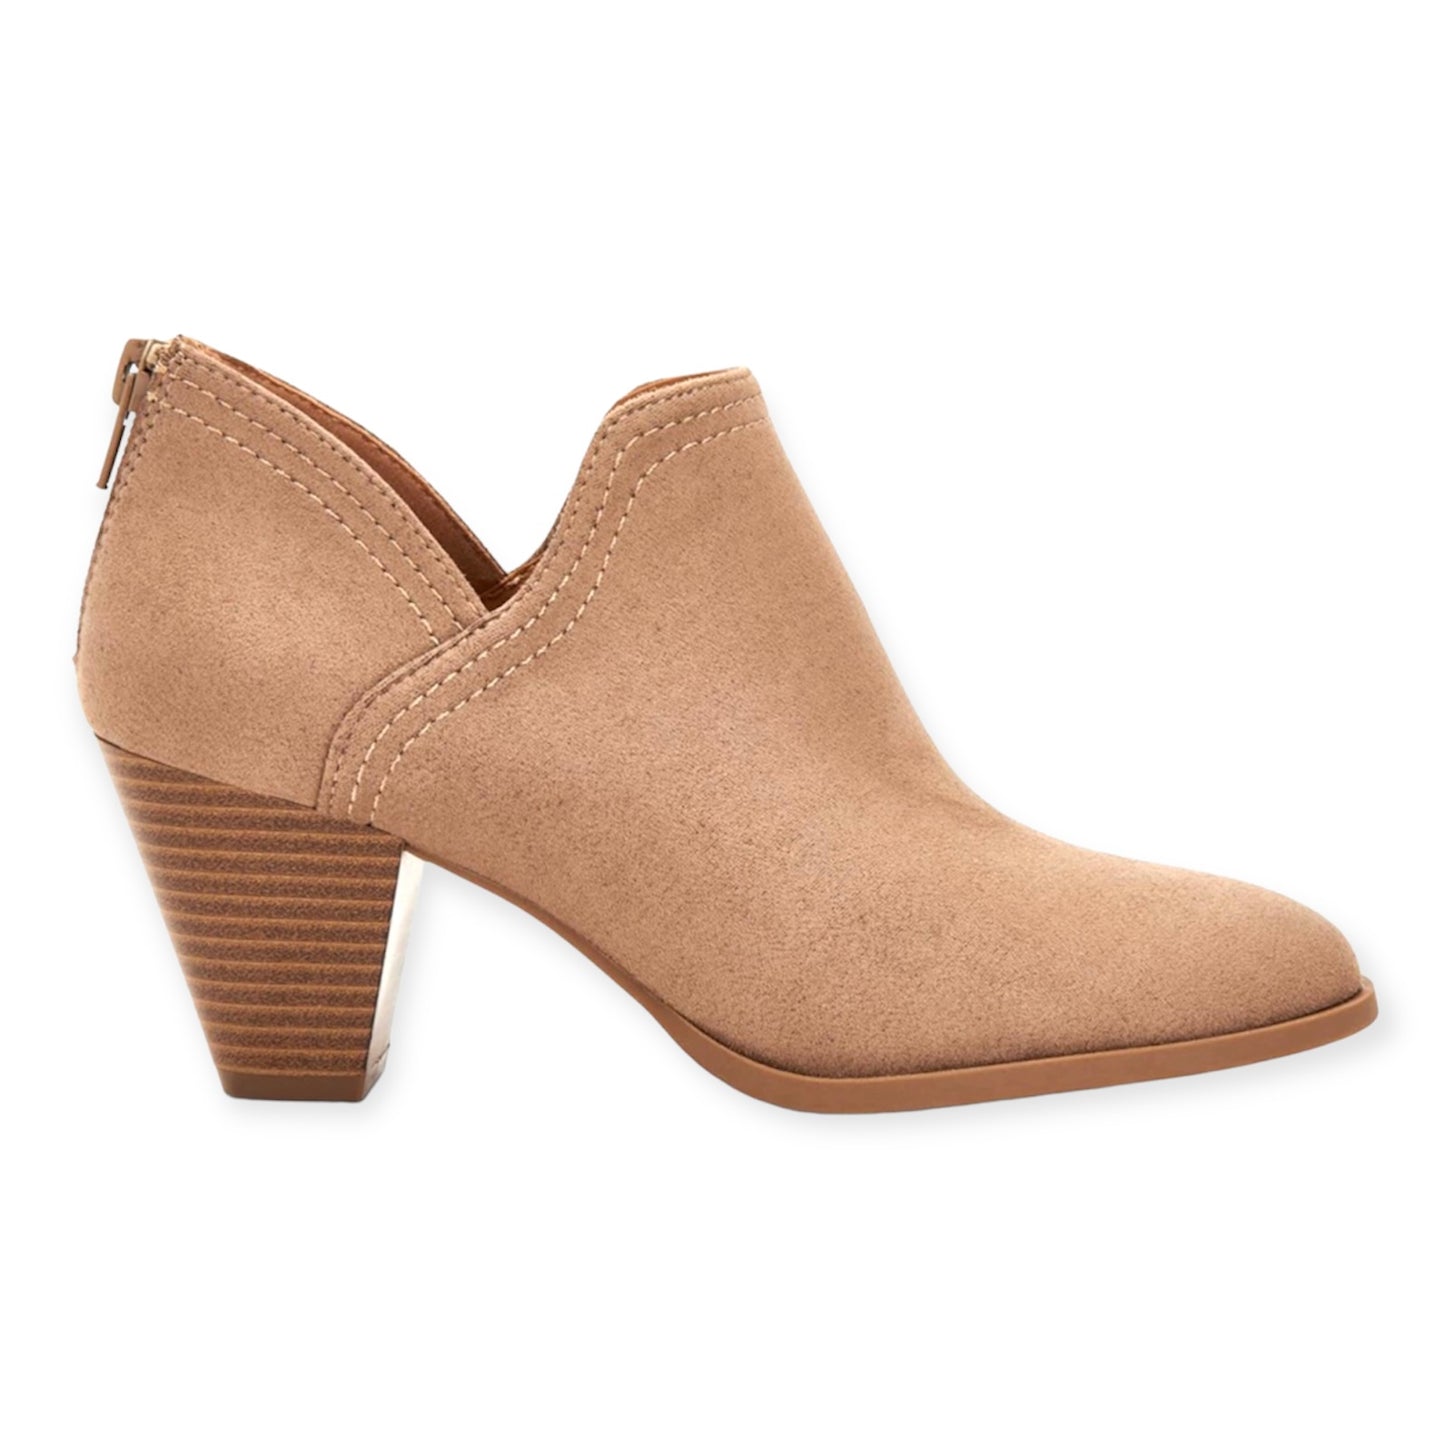 AMANDDEF Taupe Comfort Zip Up Almond Toe Bootie Women's Ankle Boots